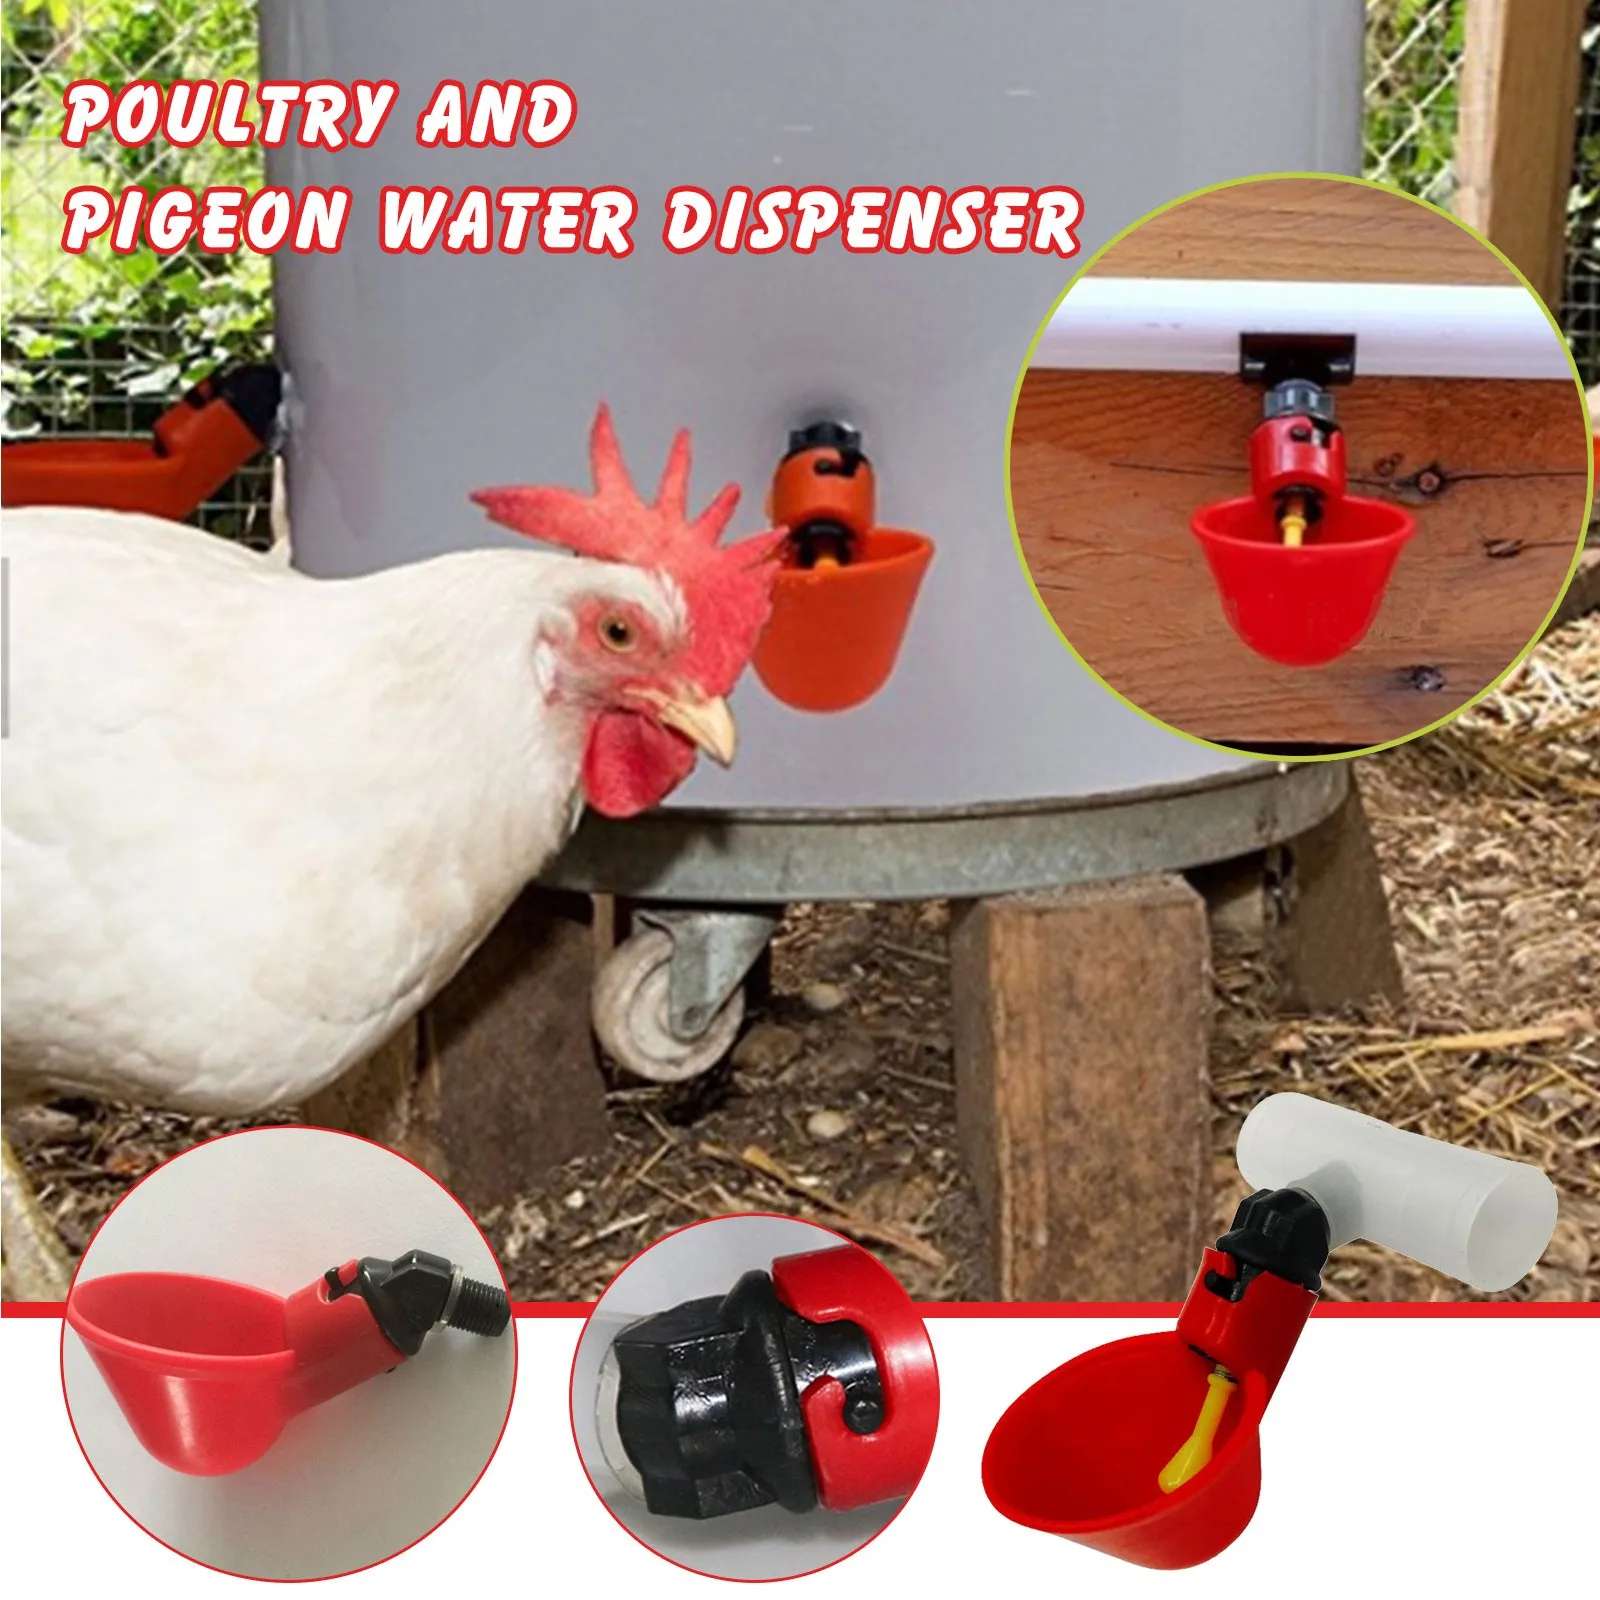 Plus-One Automatic Hanging Waterer Chicken Quail Poultry Bird Waterer 